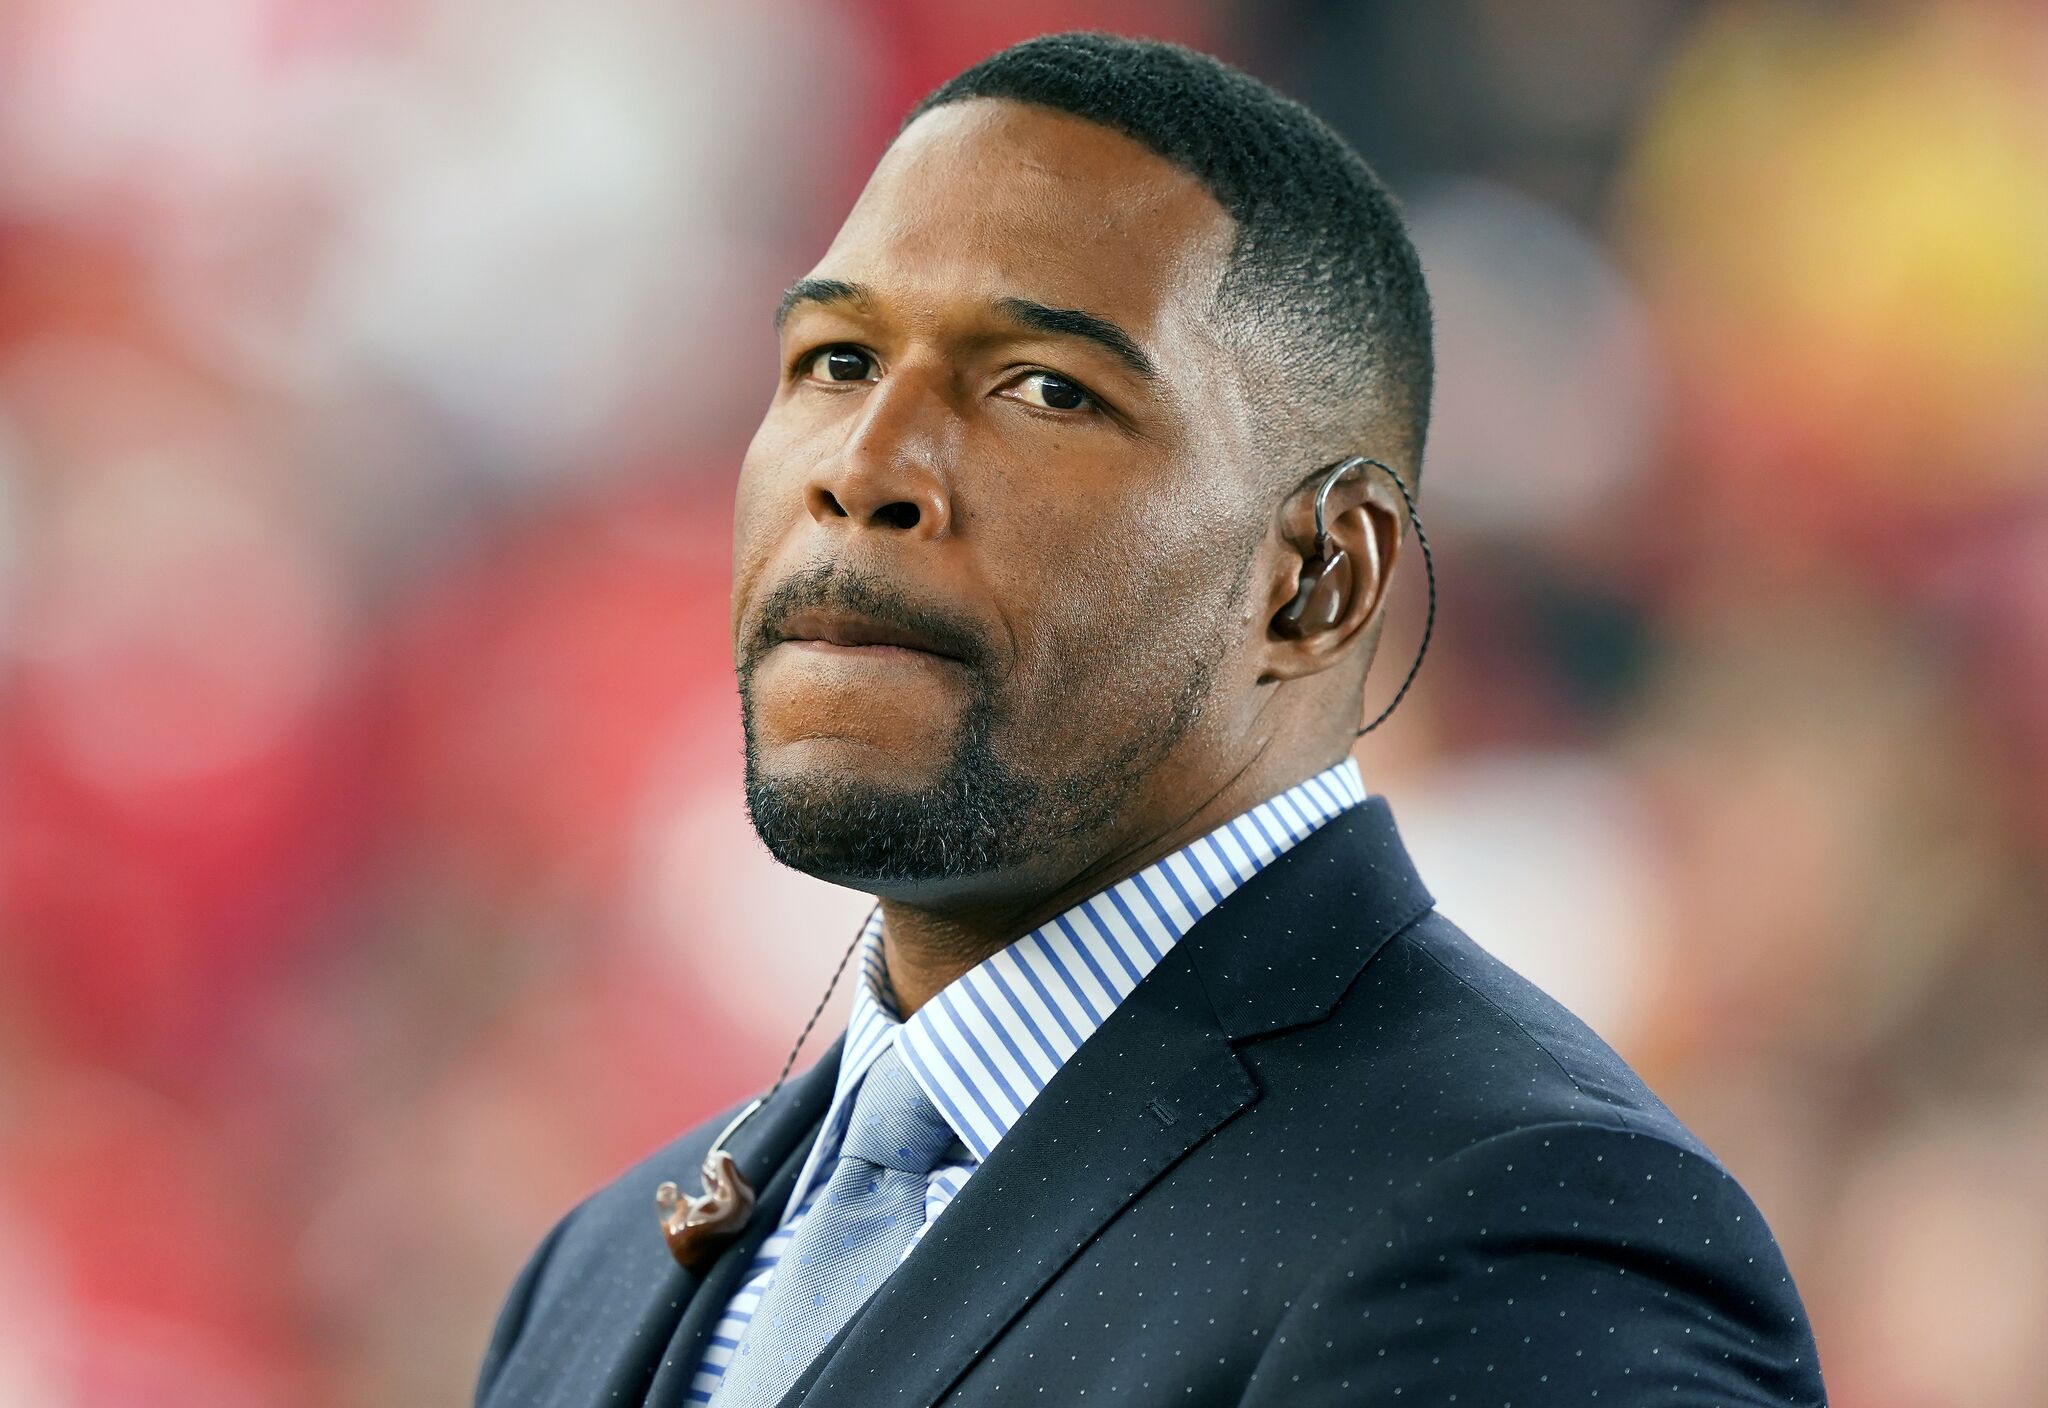 TV personality Michael Strahan looks on prior to the NFC Championship game between the San Francisco 49ers and the Green Bay Packers at Levi's Stadium on January 19 | Photo: Getty Images